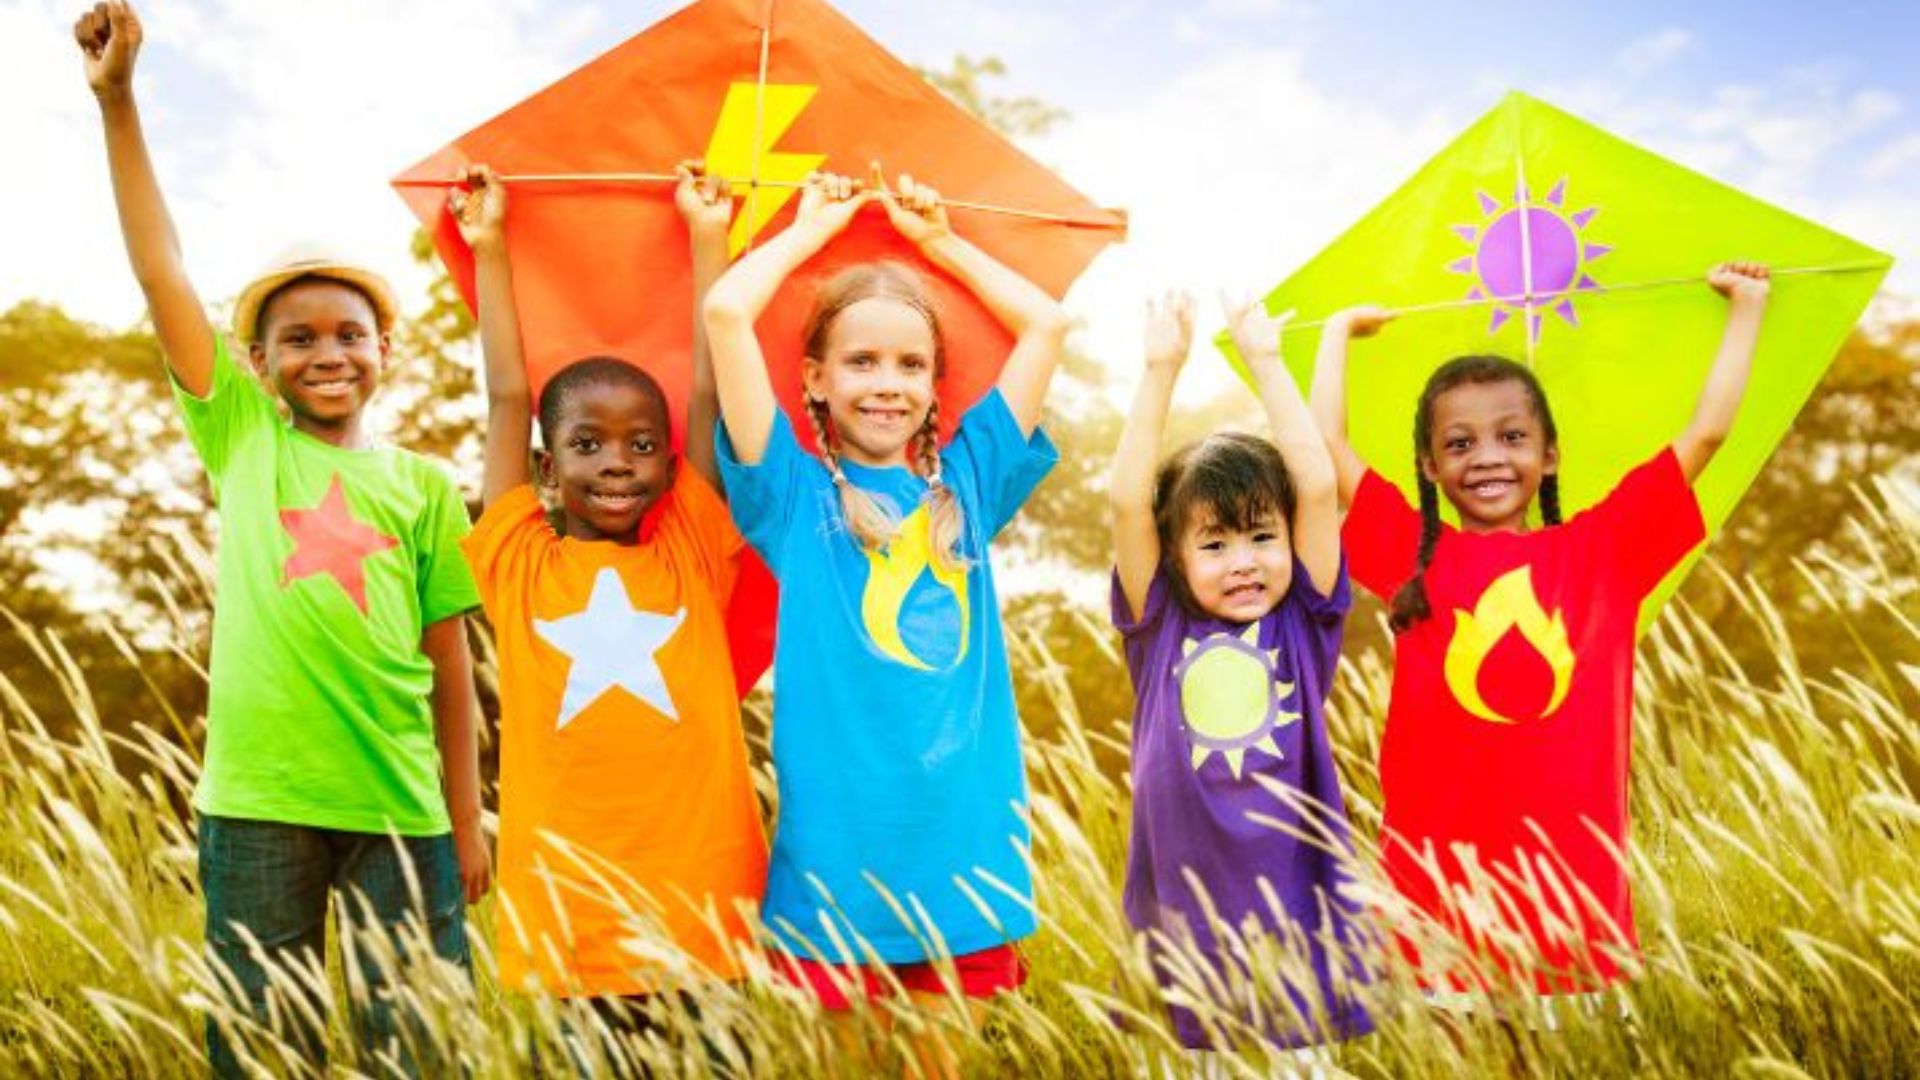 a group of children holding colorful kites in a field